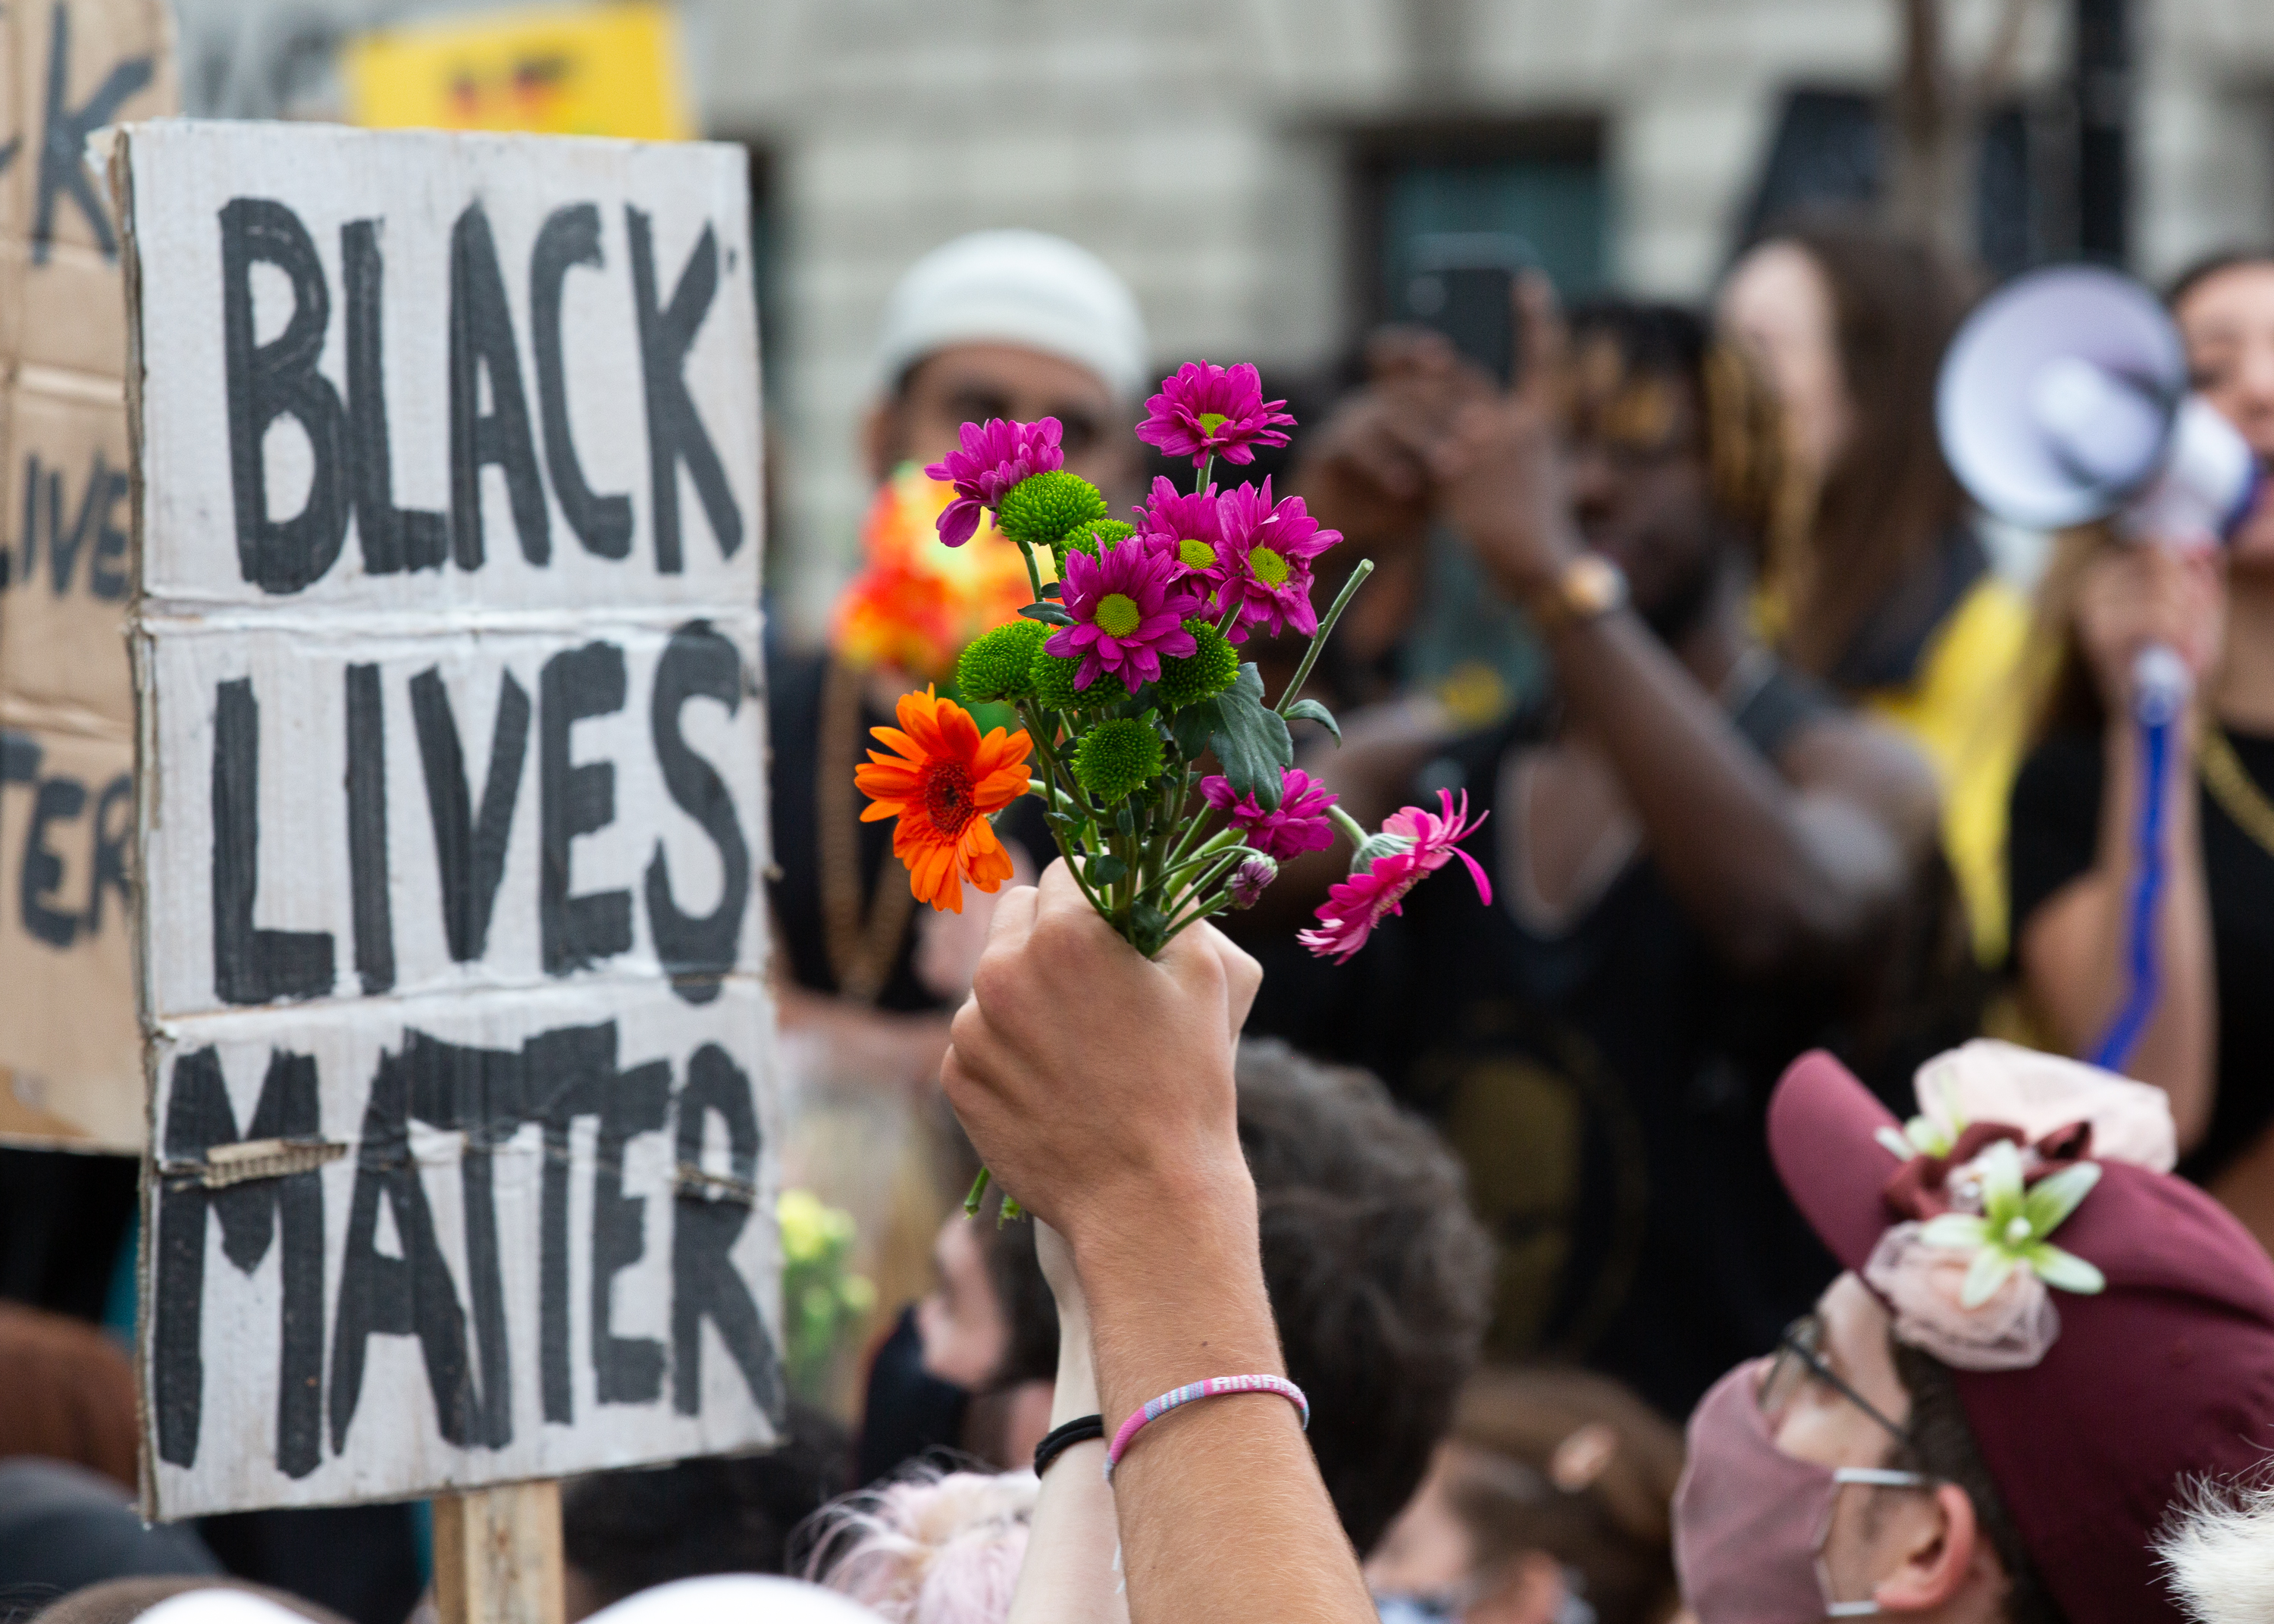 Large crowds march through London in support of ‘Black Trans Lives Matter’